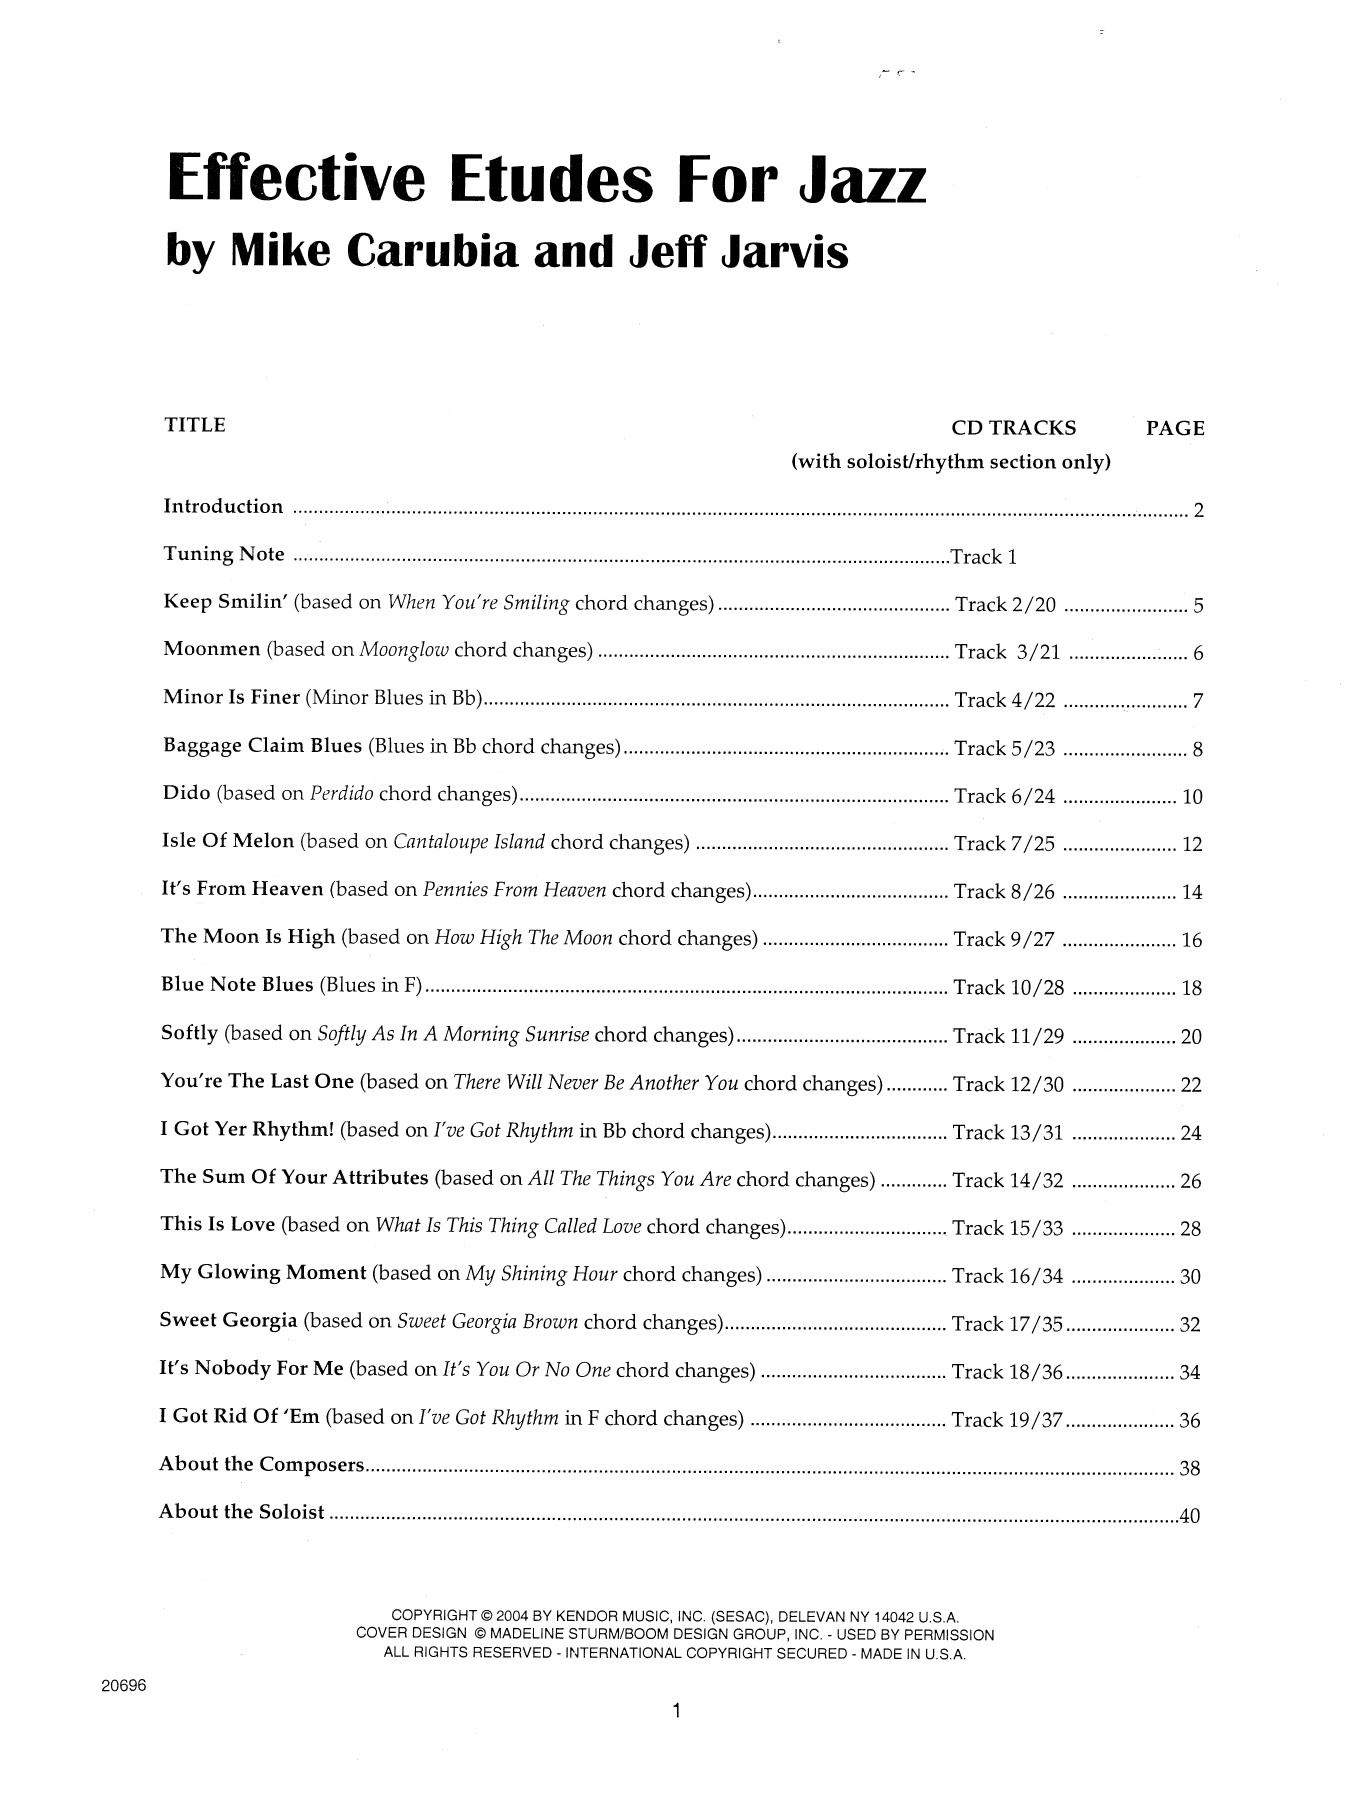 Download Mike Carubia & Jeff Jarvis Effective Etudes For Jazz - Trombone Sheet Music